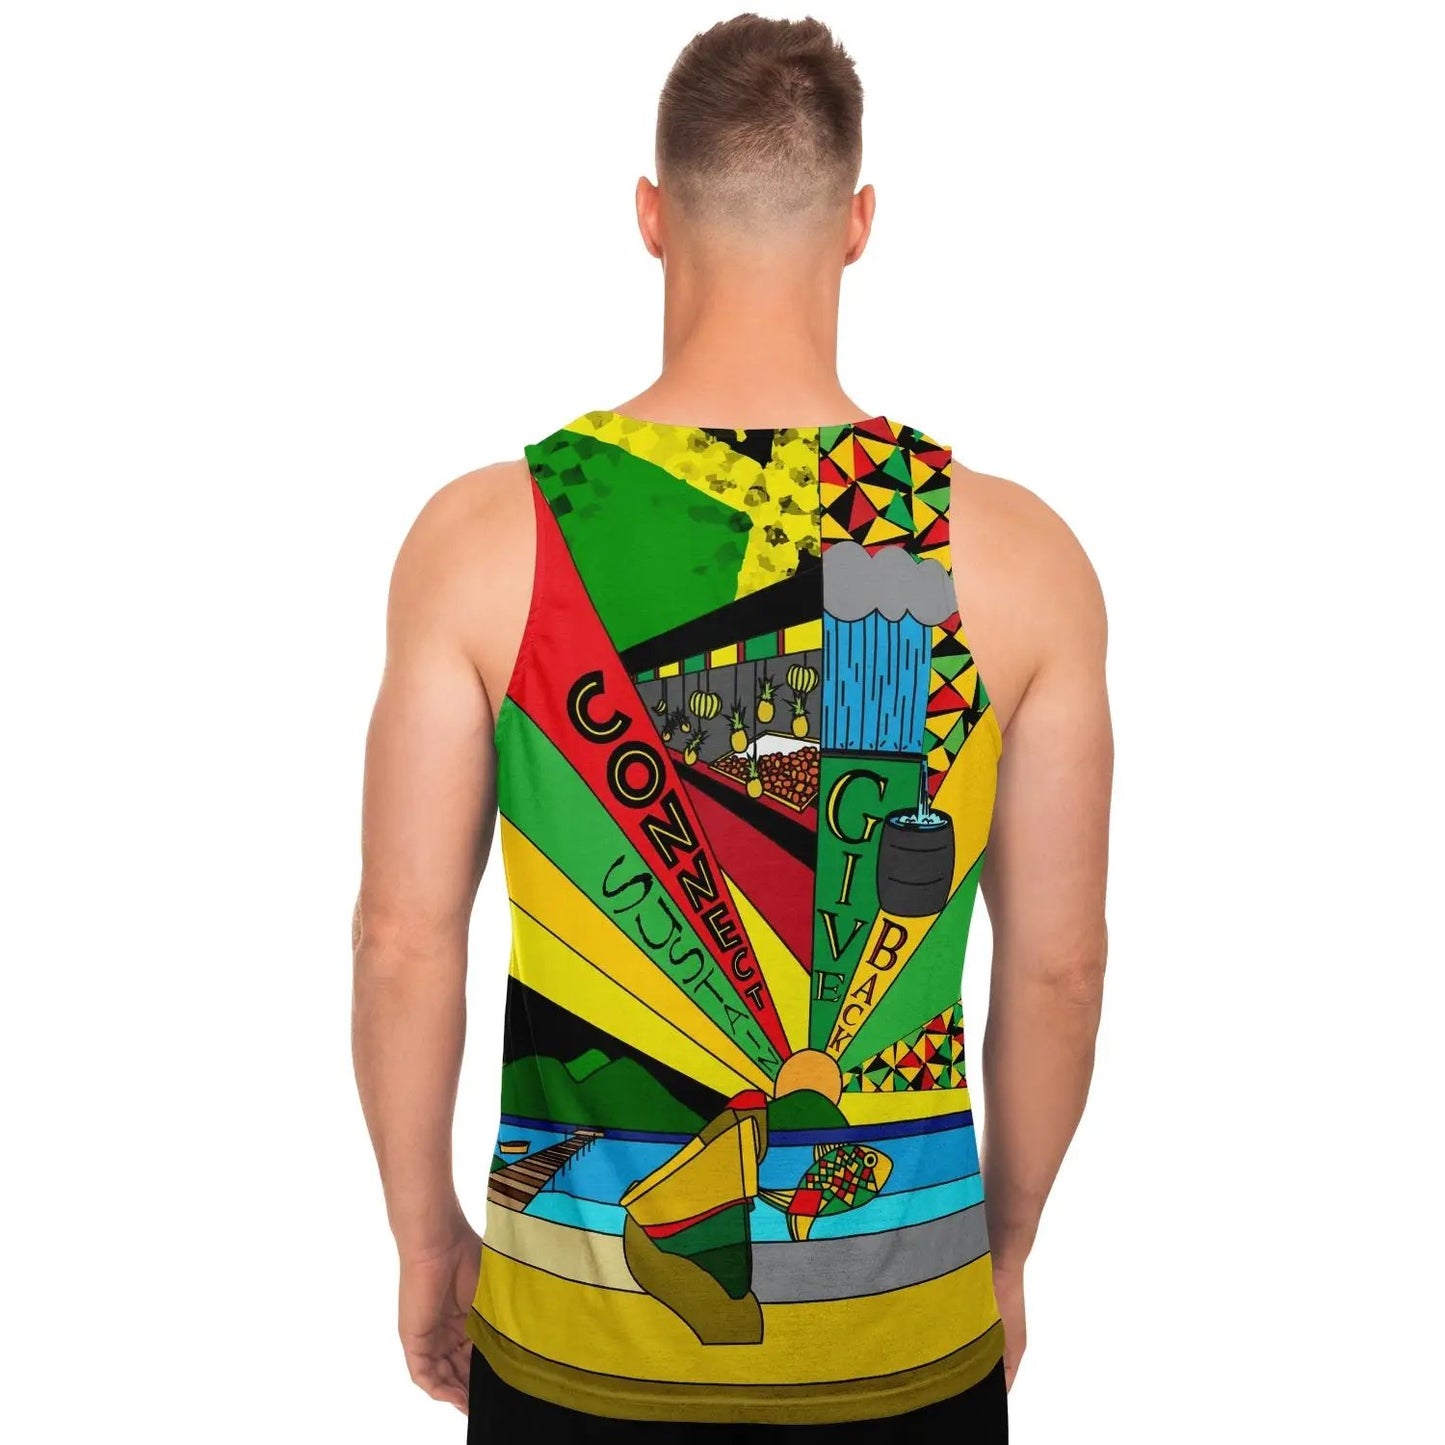 Jah Works Give Back Colorful Tank Top